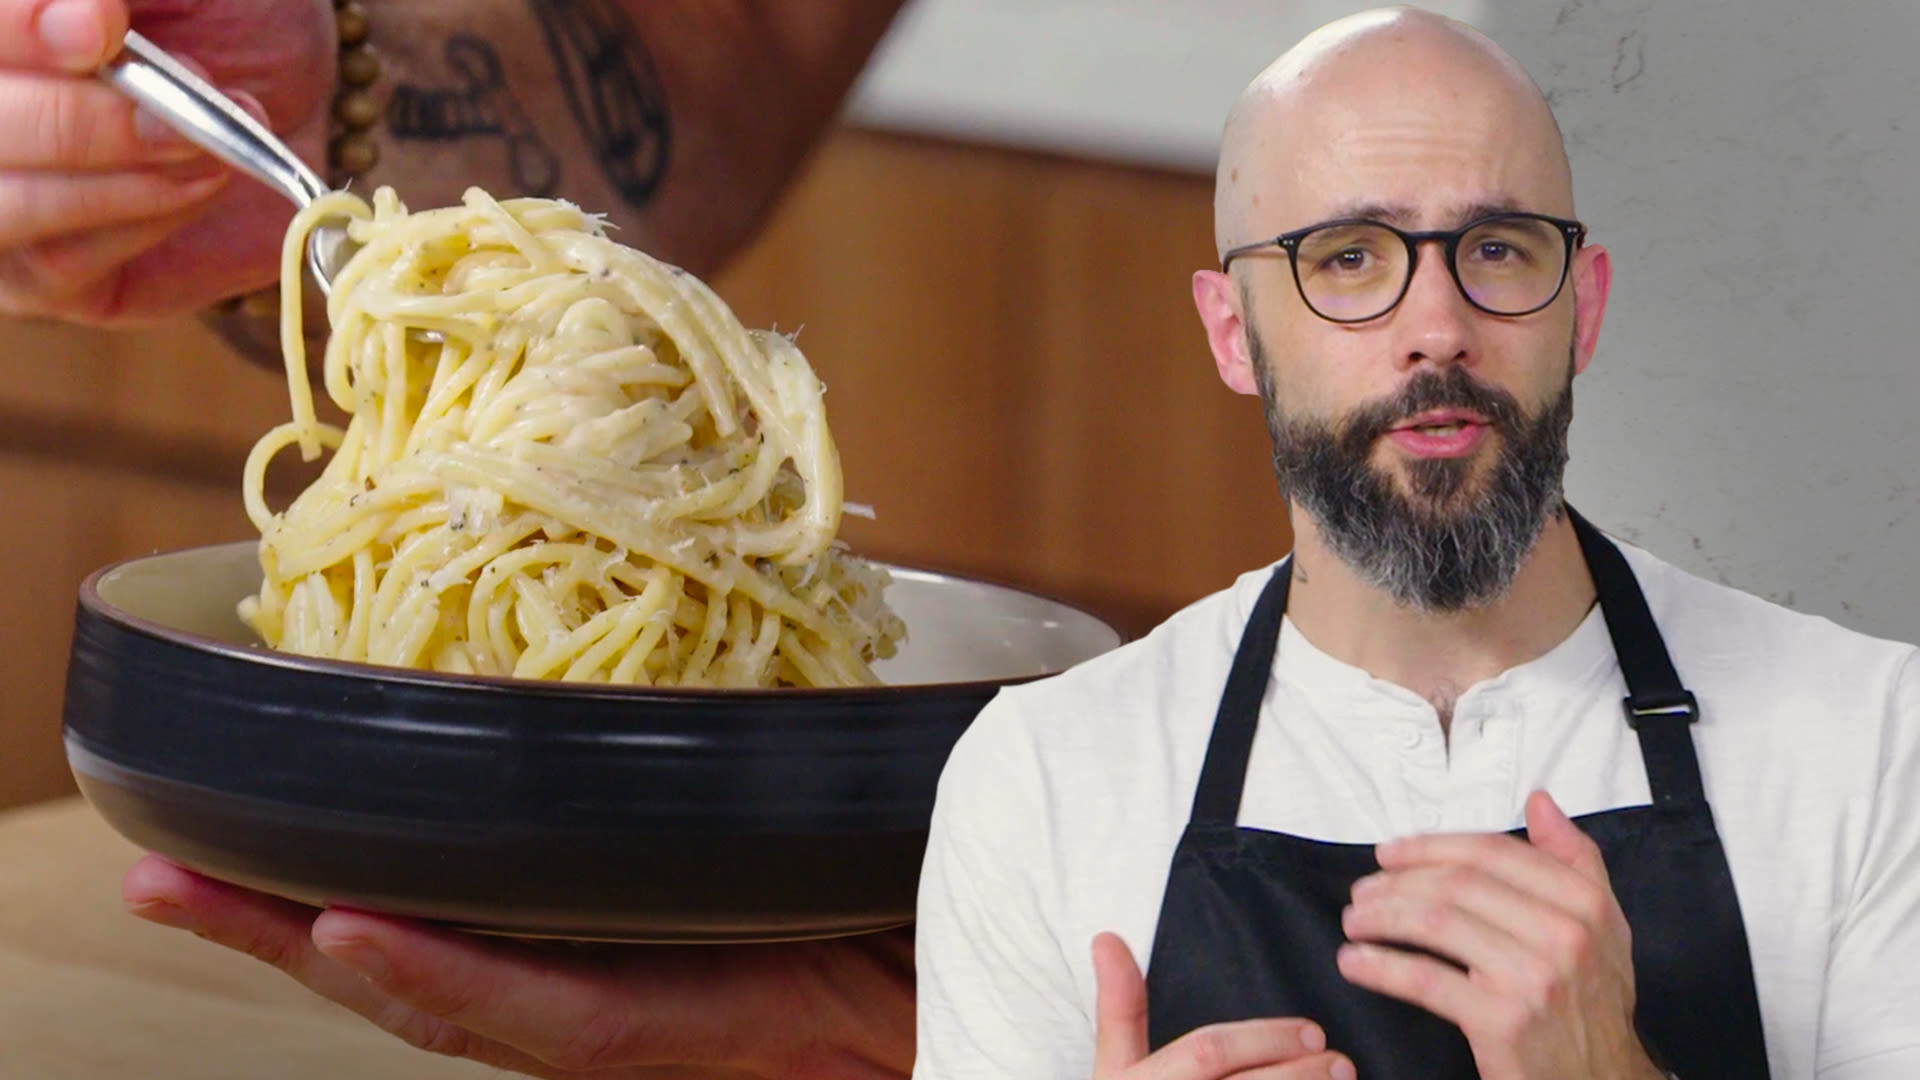 Use and Care — Binging With Babish